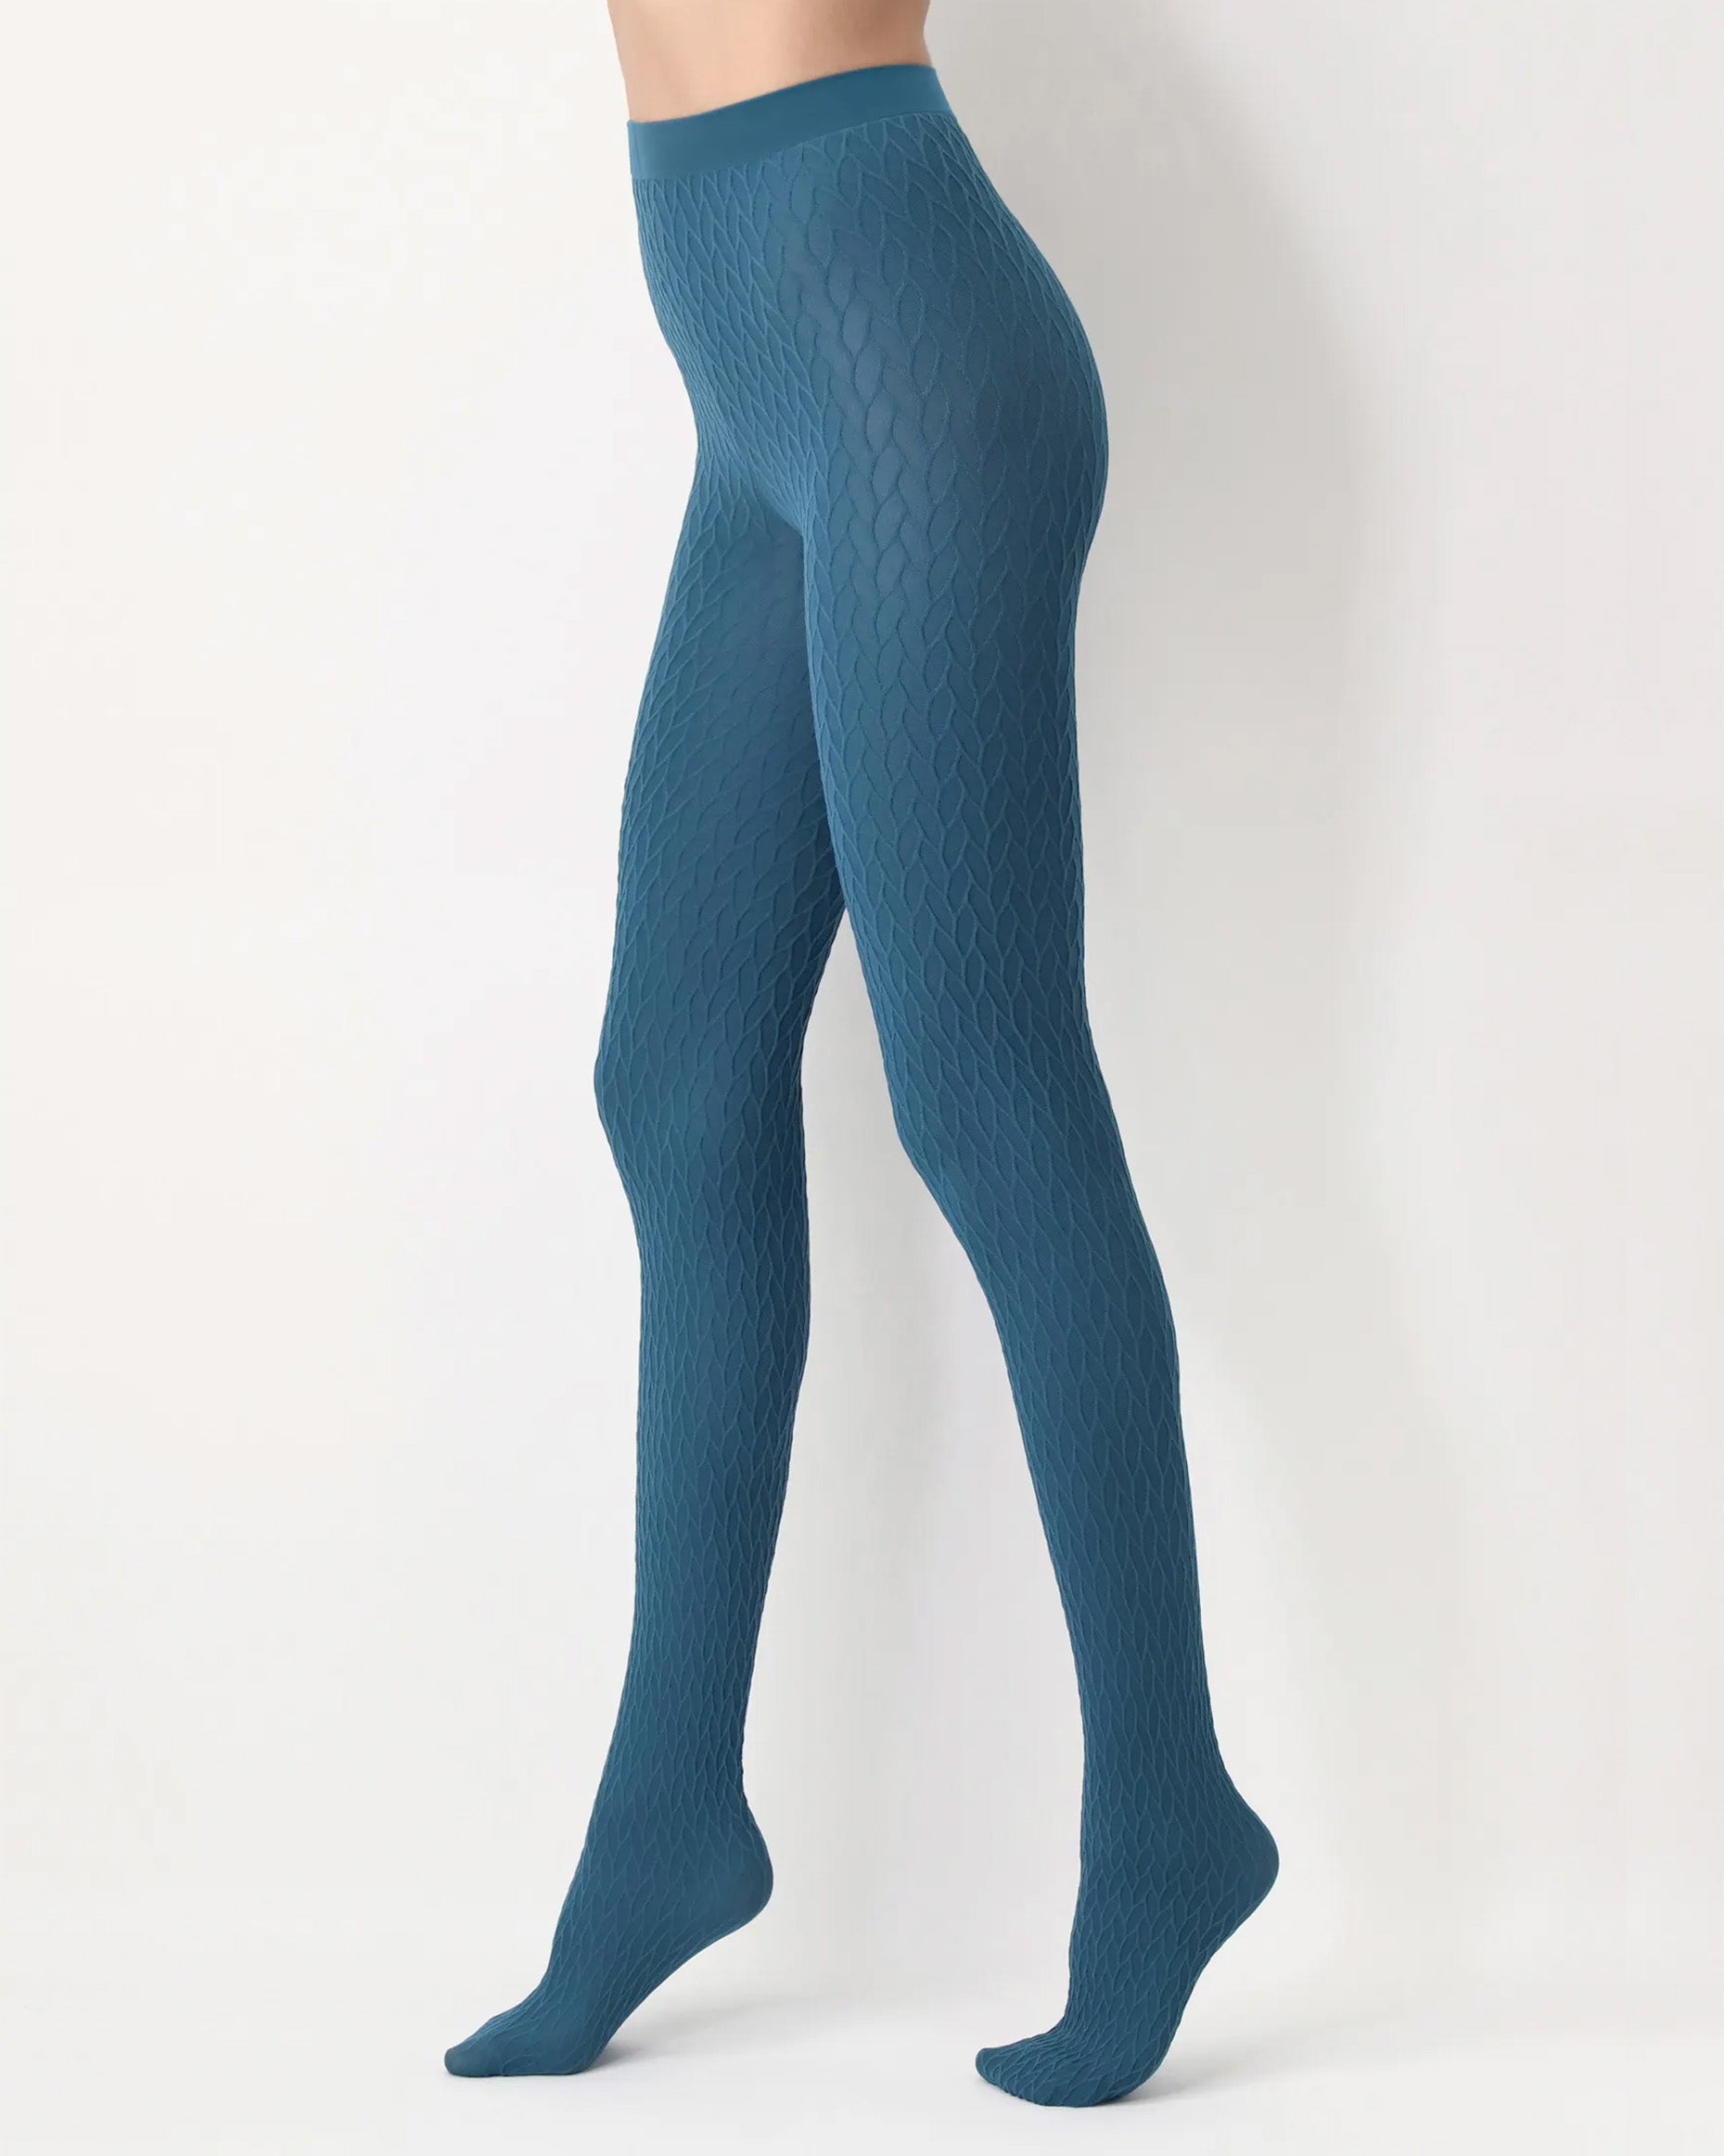 Oroblù Winding Tights - Teal blue opaque fashion tights with an all over subtle braided cable knit style textured pattern